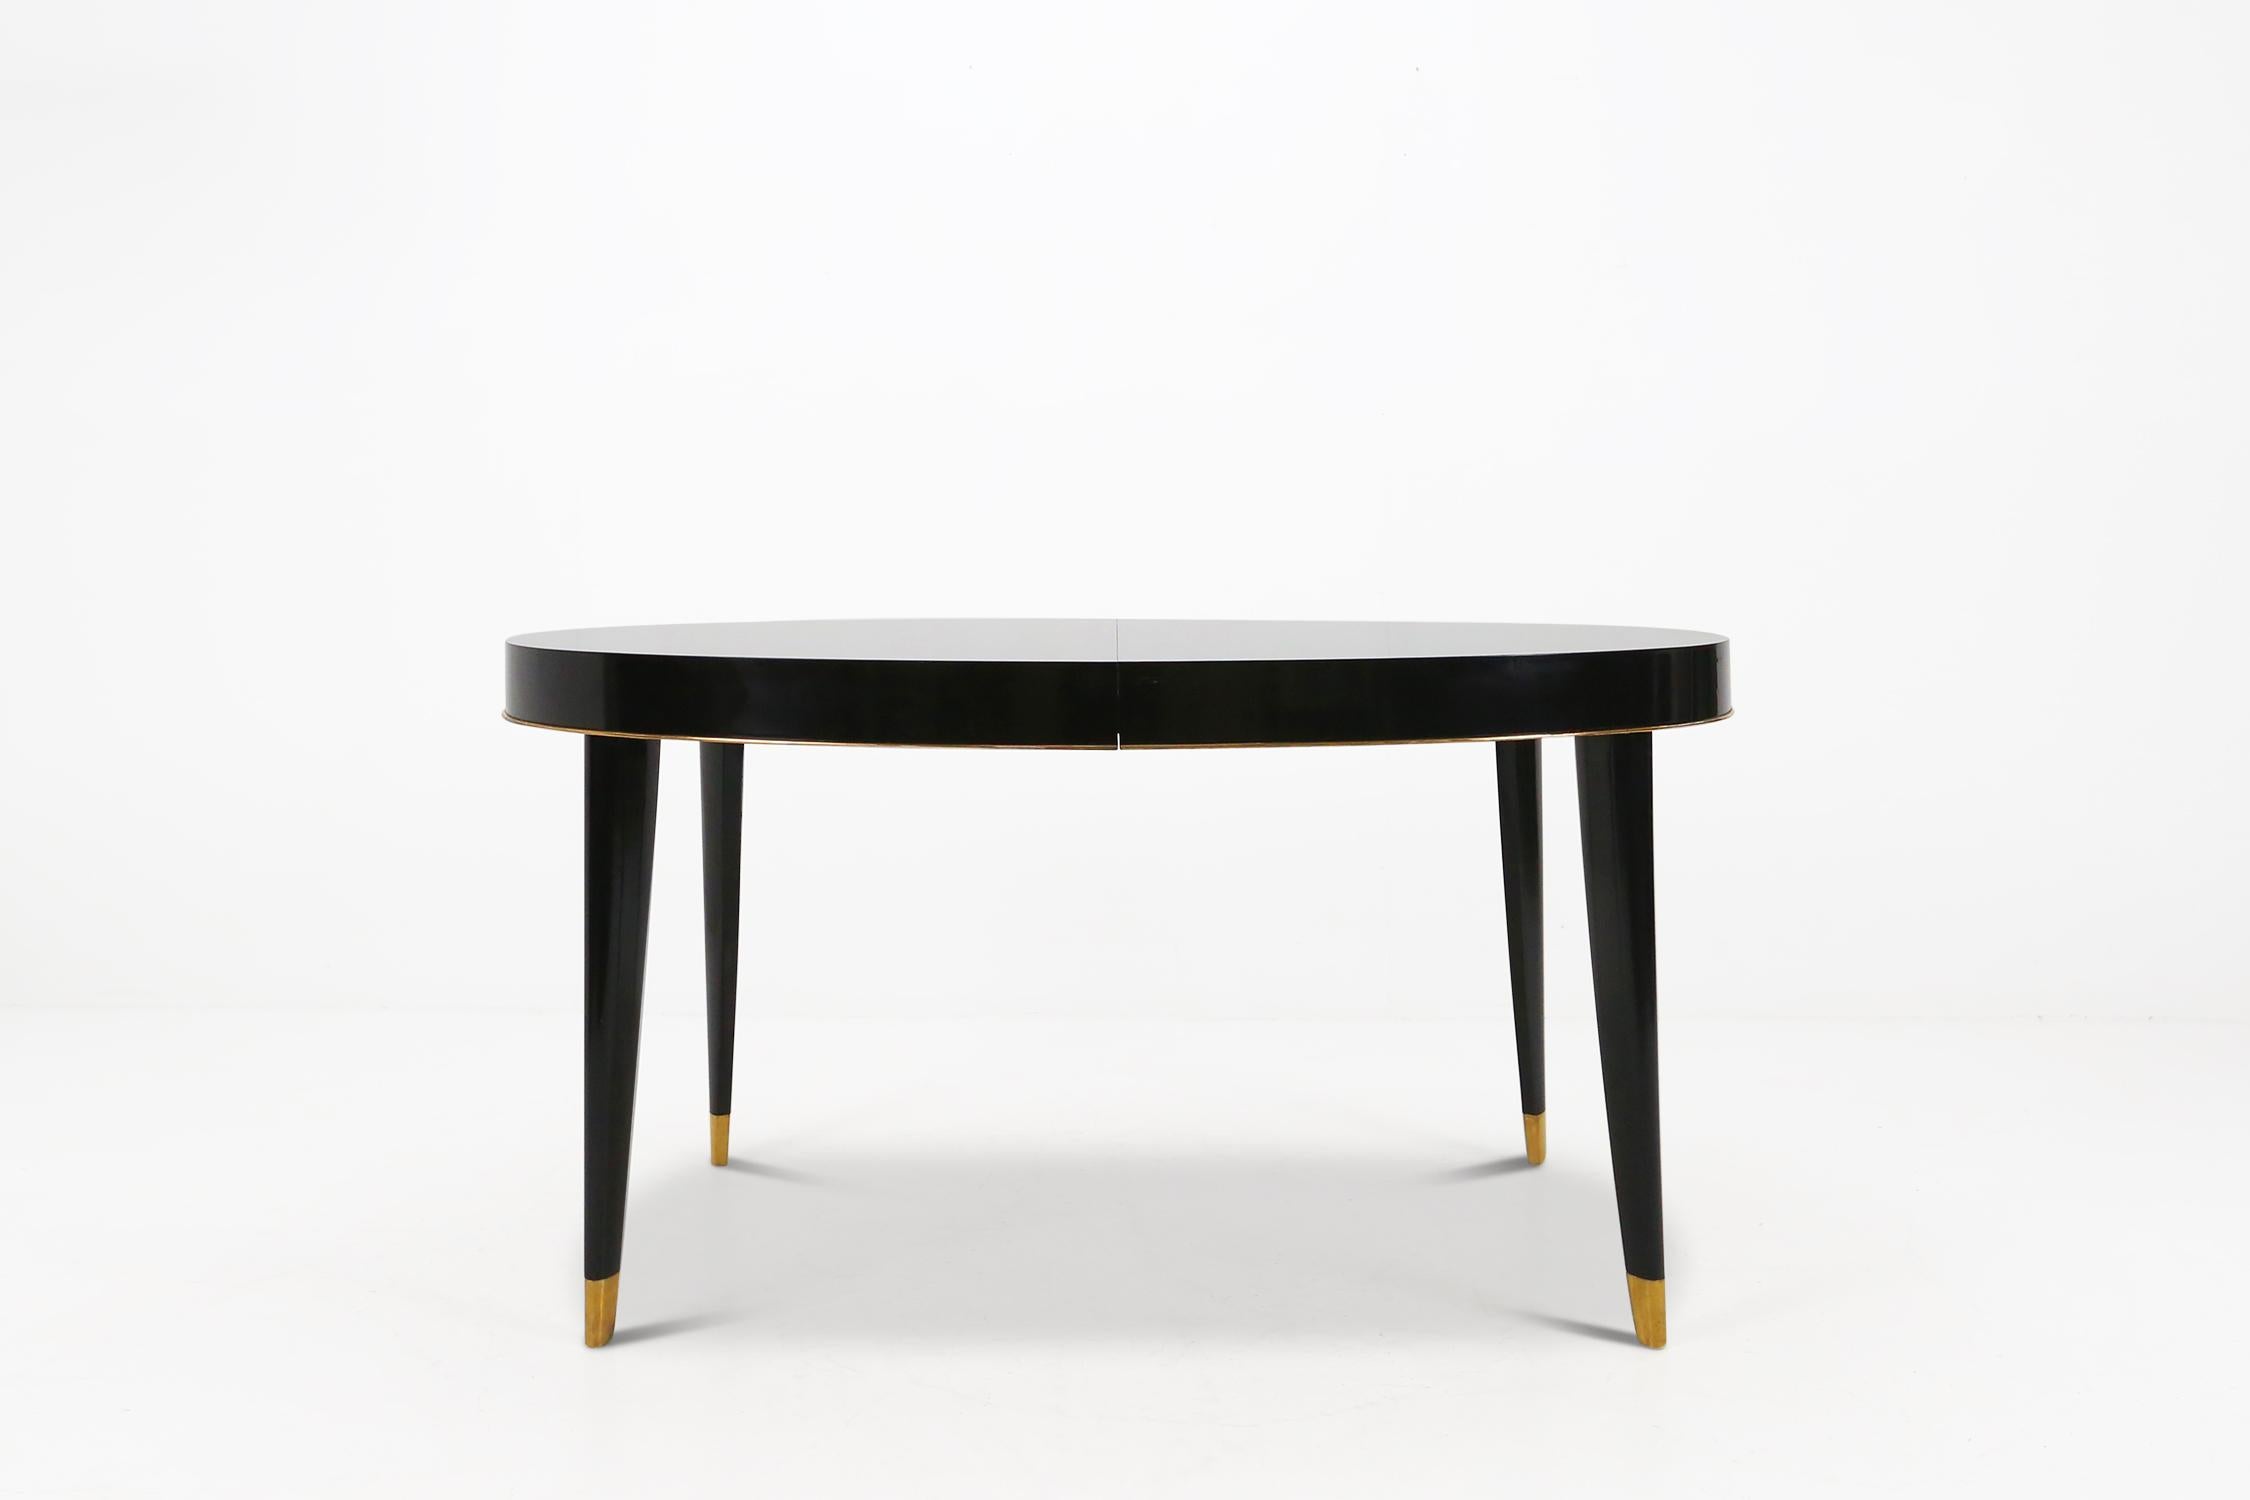 Art Deco dining table by De Coene Belgium made around 1940.
Made of black piano lacquered wood and polished brass feet.
The extensions for the table are no longer present.